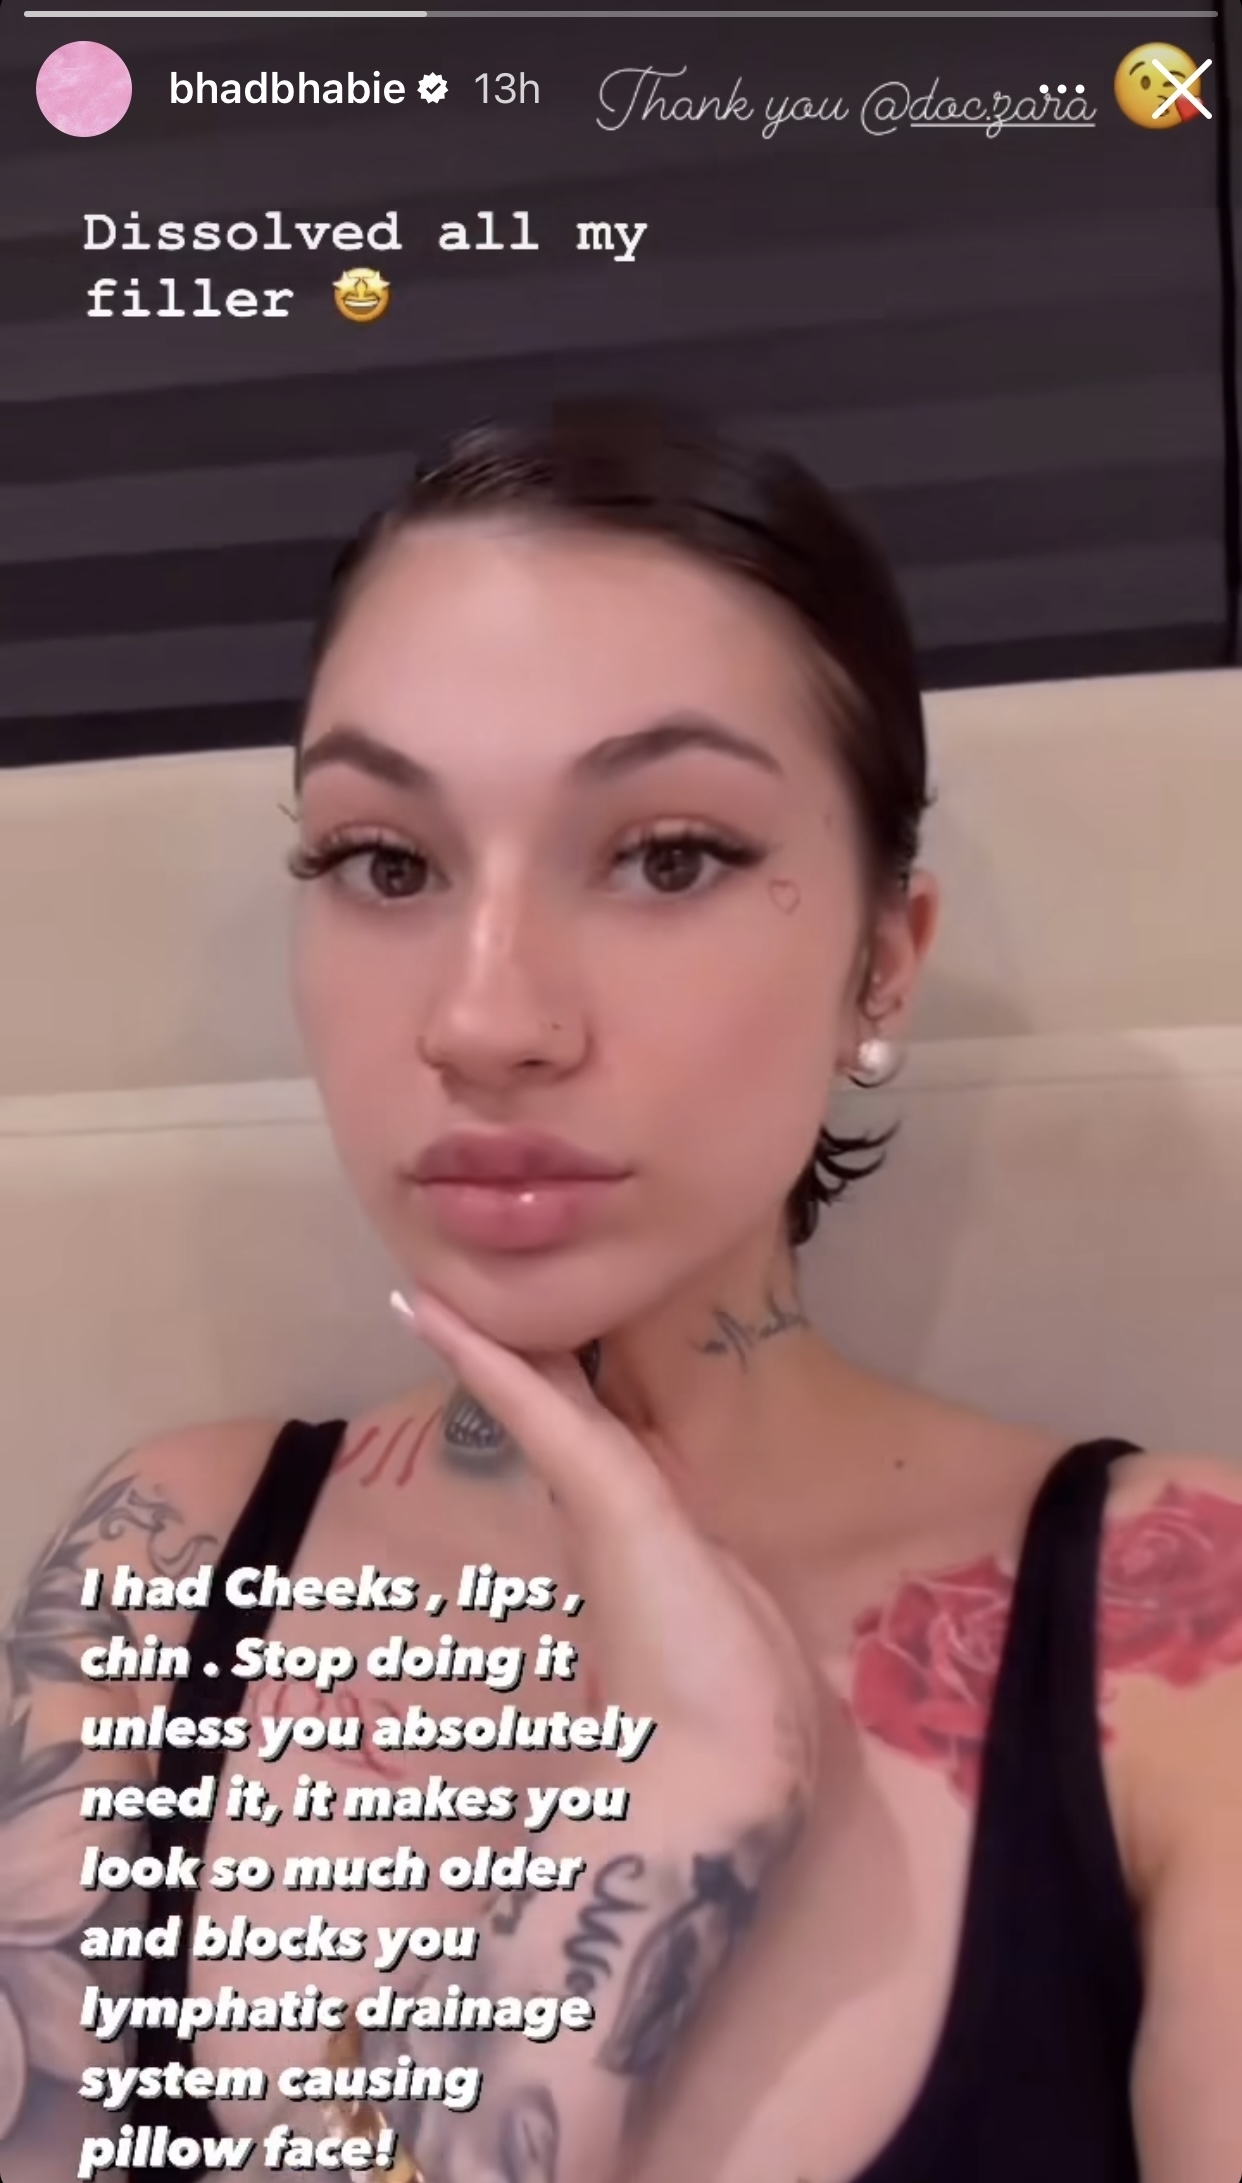 Photo of Bhad Bhabie touching her face, wearing a black top, with facial piercings and tattoos. Text overlays express gratitude